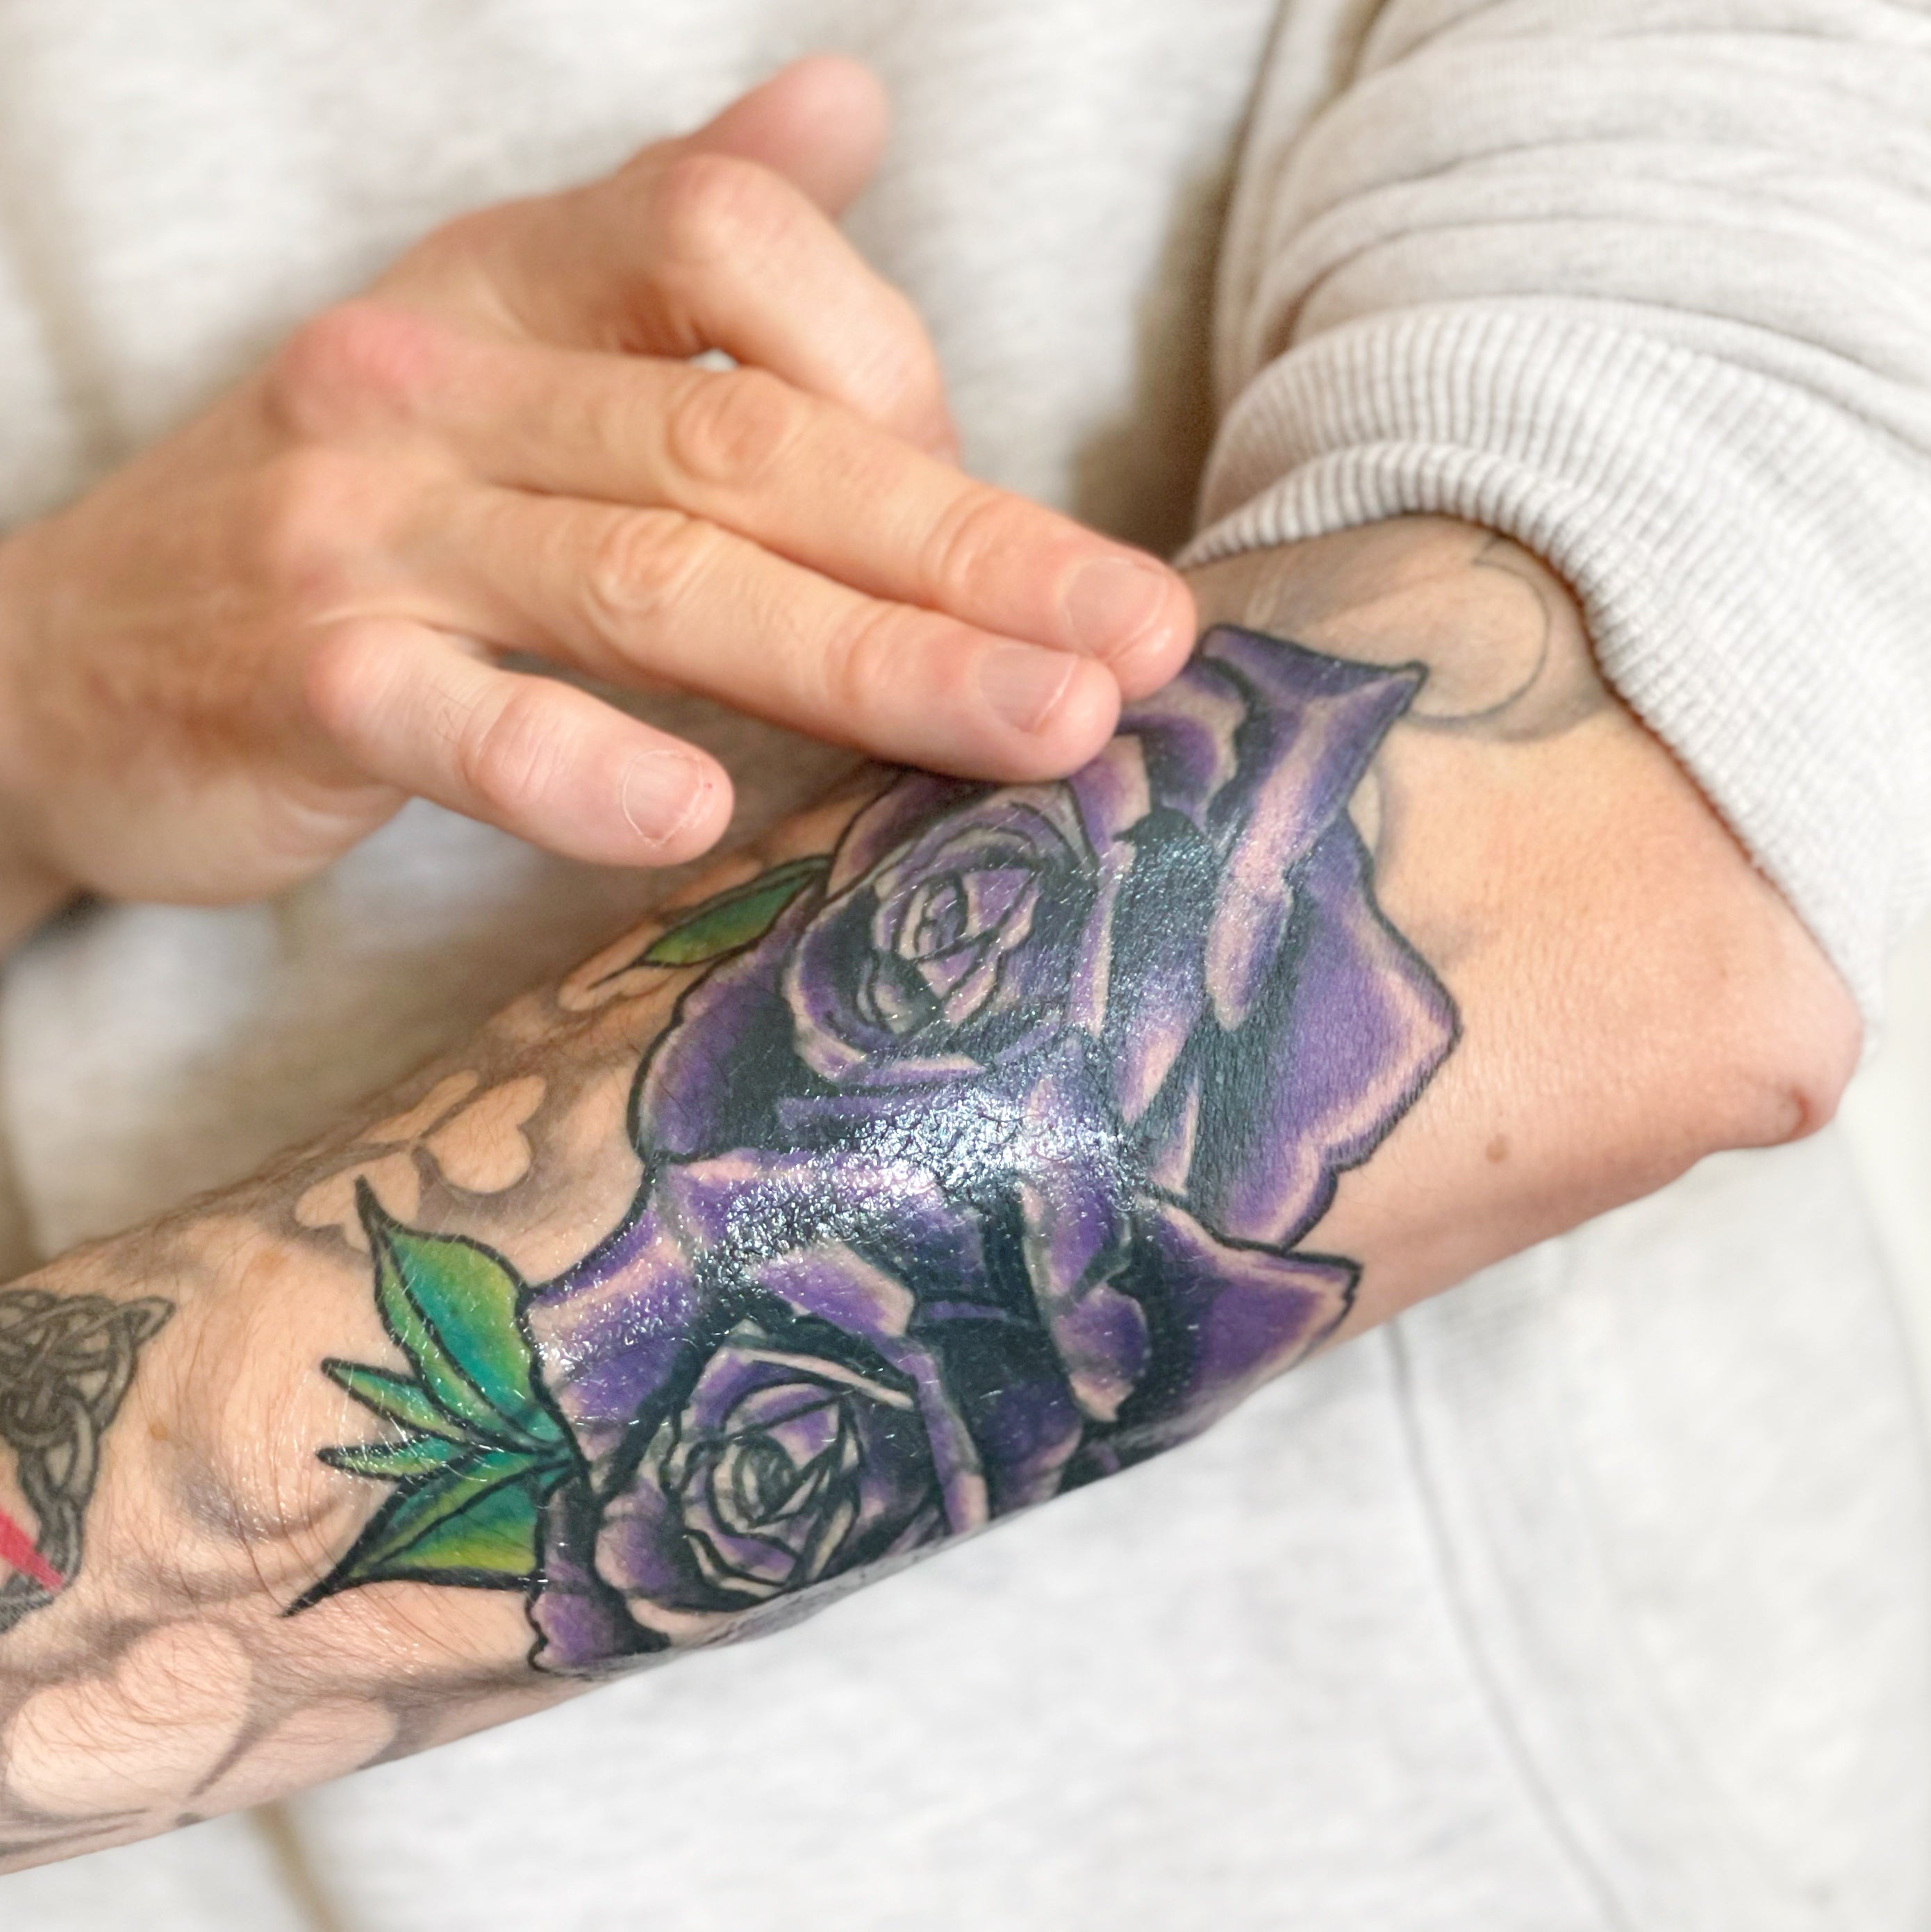 How to Care for Your New Tattoo